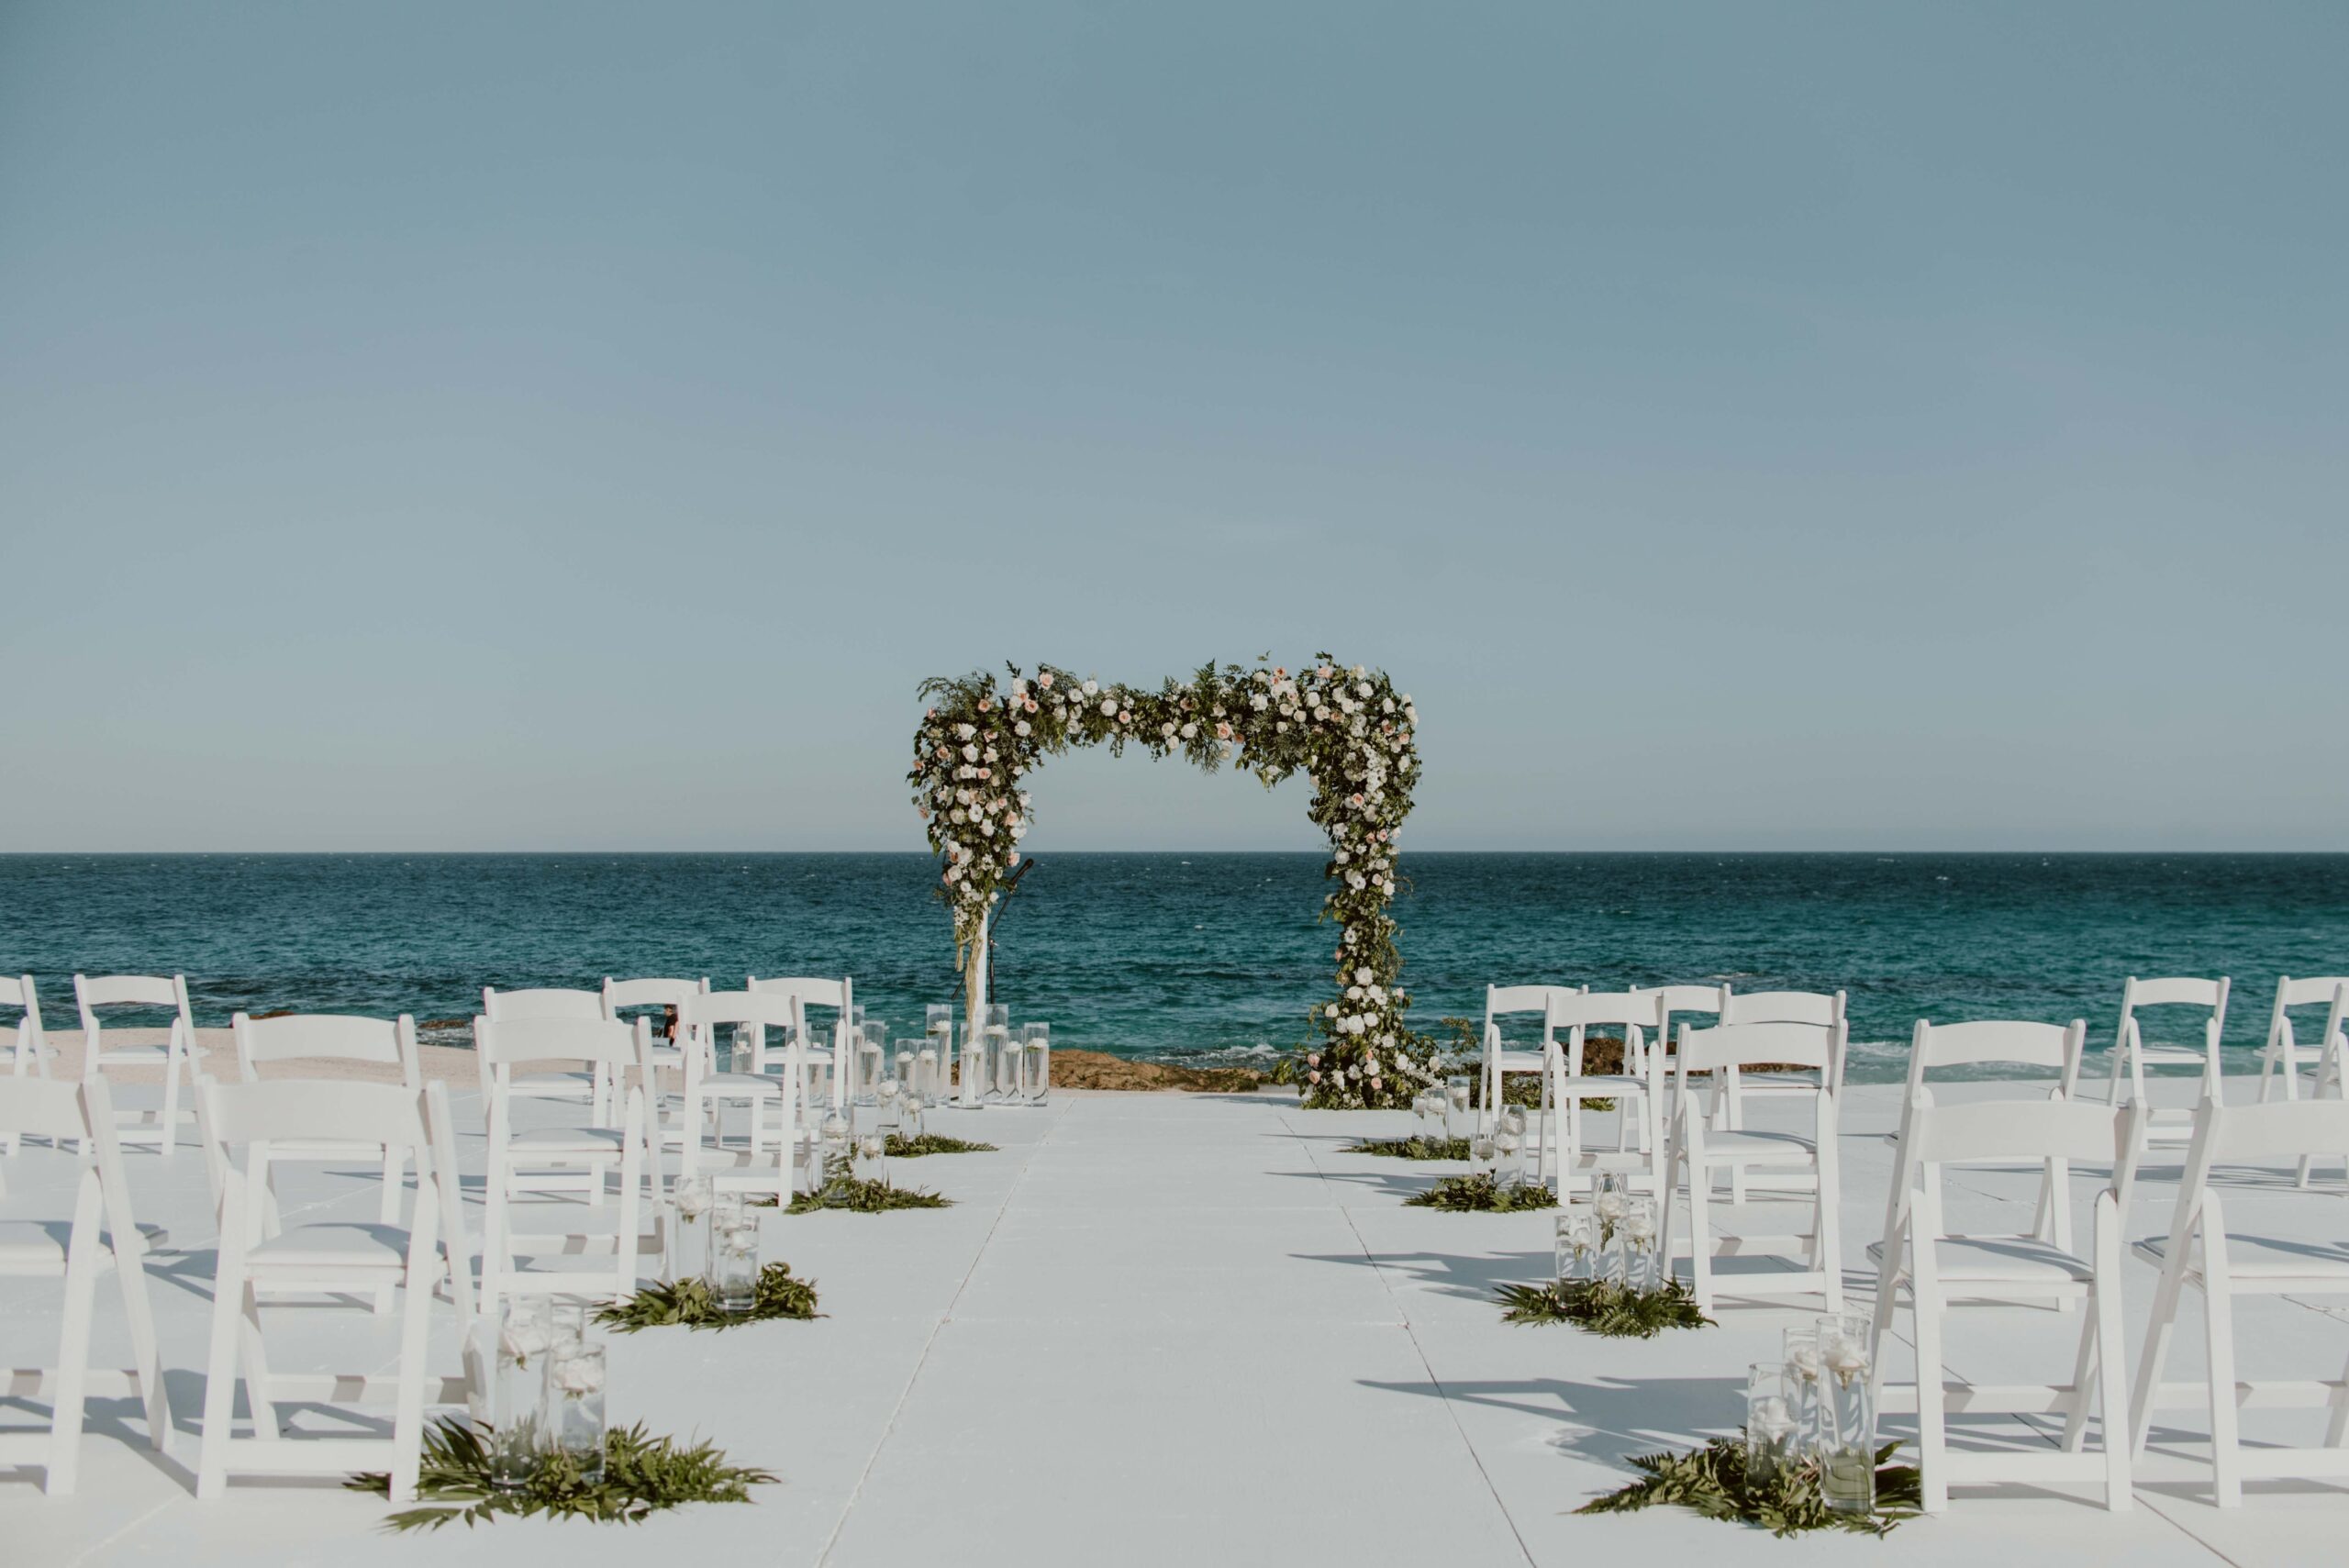 http://picture%20of%20a%20wedding%20setup%20on%20the%20beach